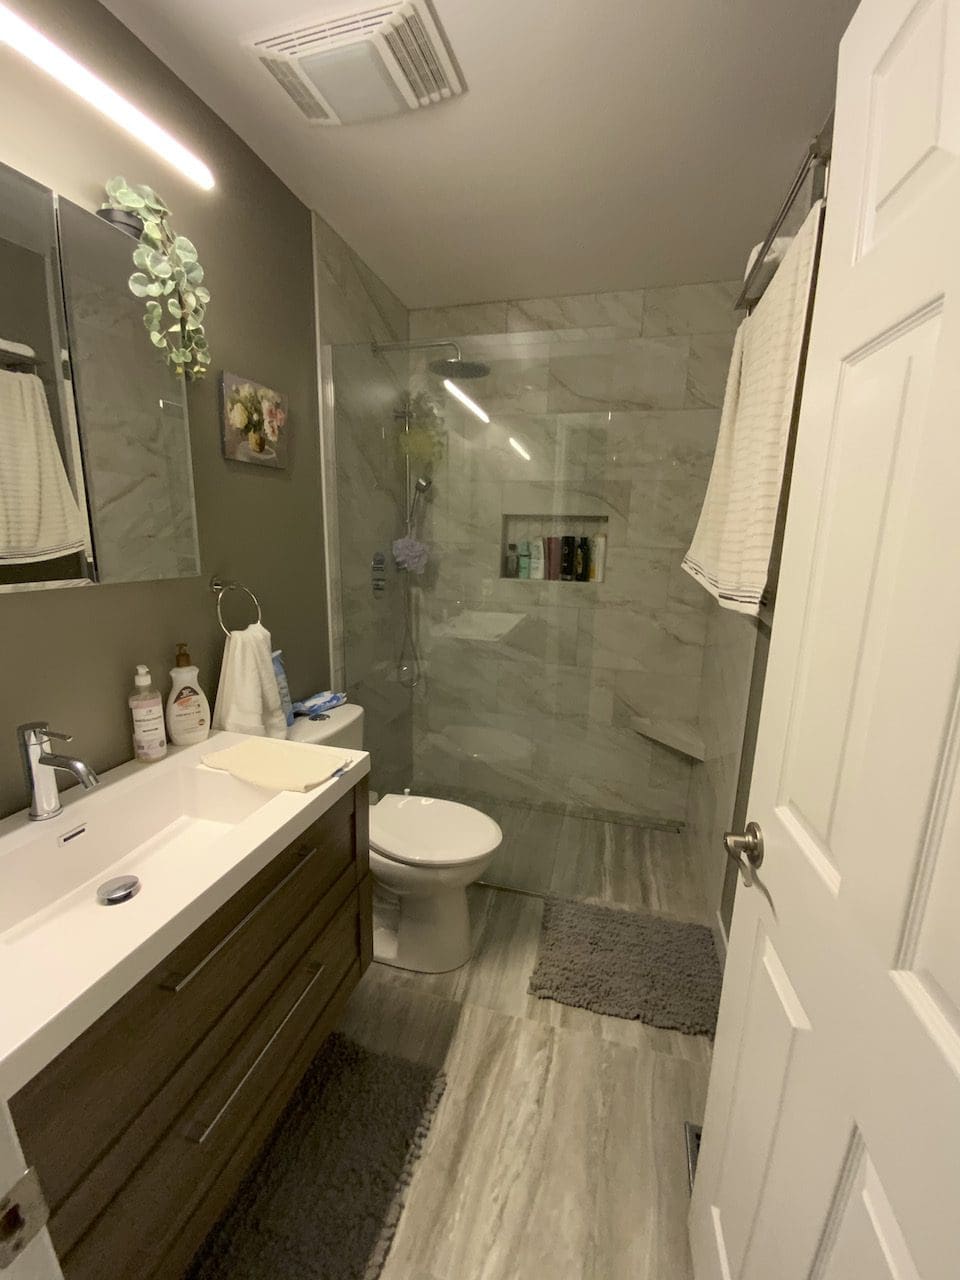 A hallway bathroom remodel of ours, which was in the $20,000s.